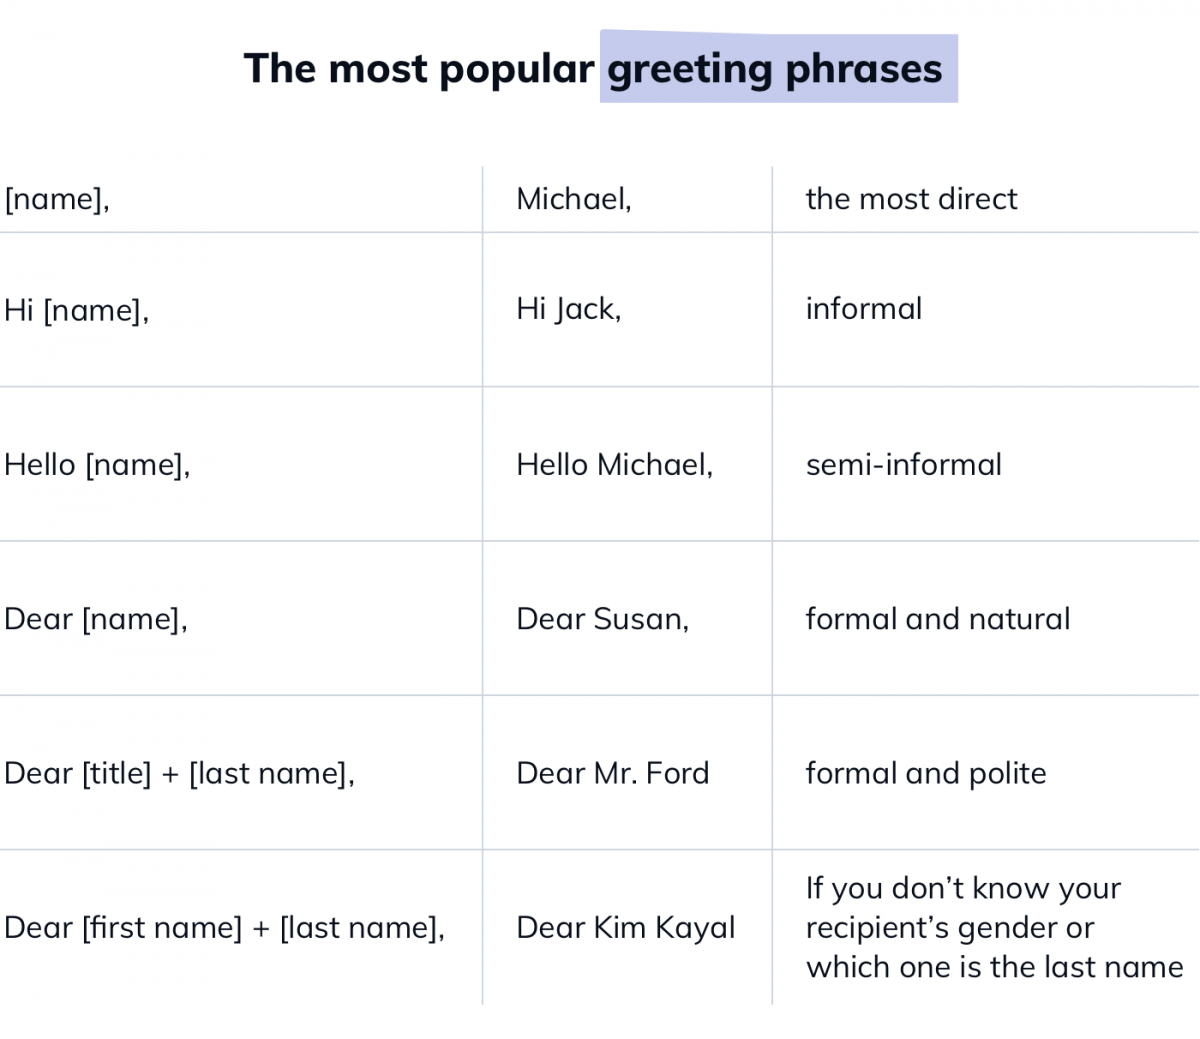 Table with the most popular greeting phrases